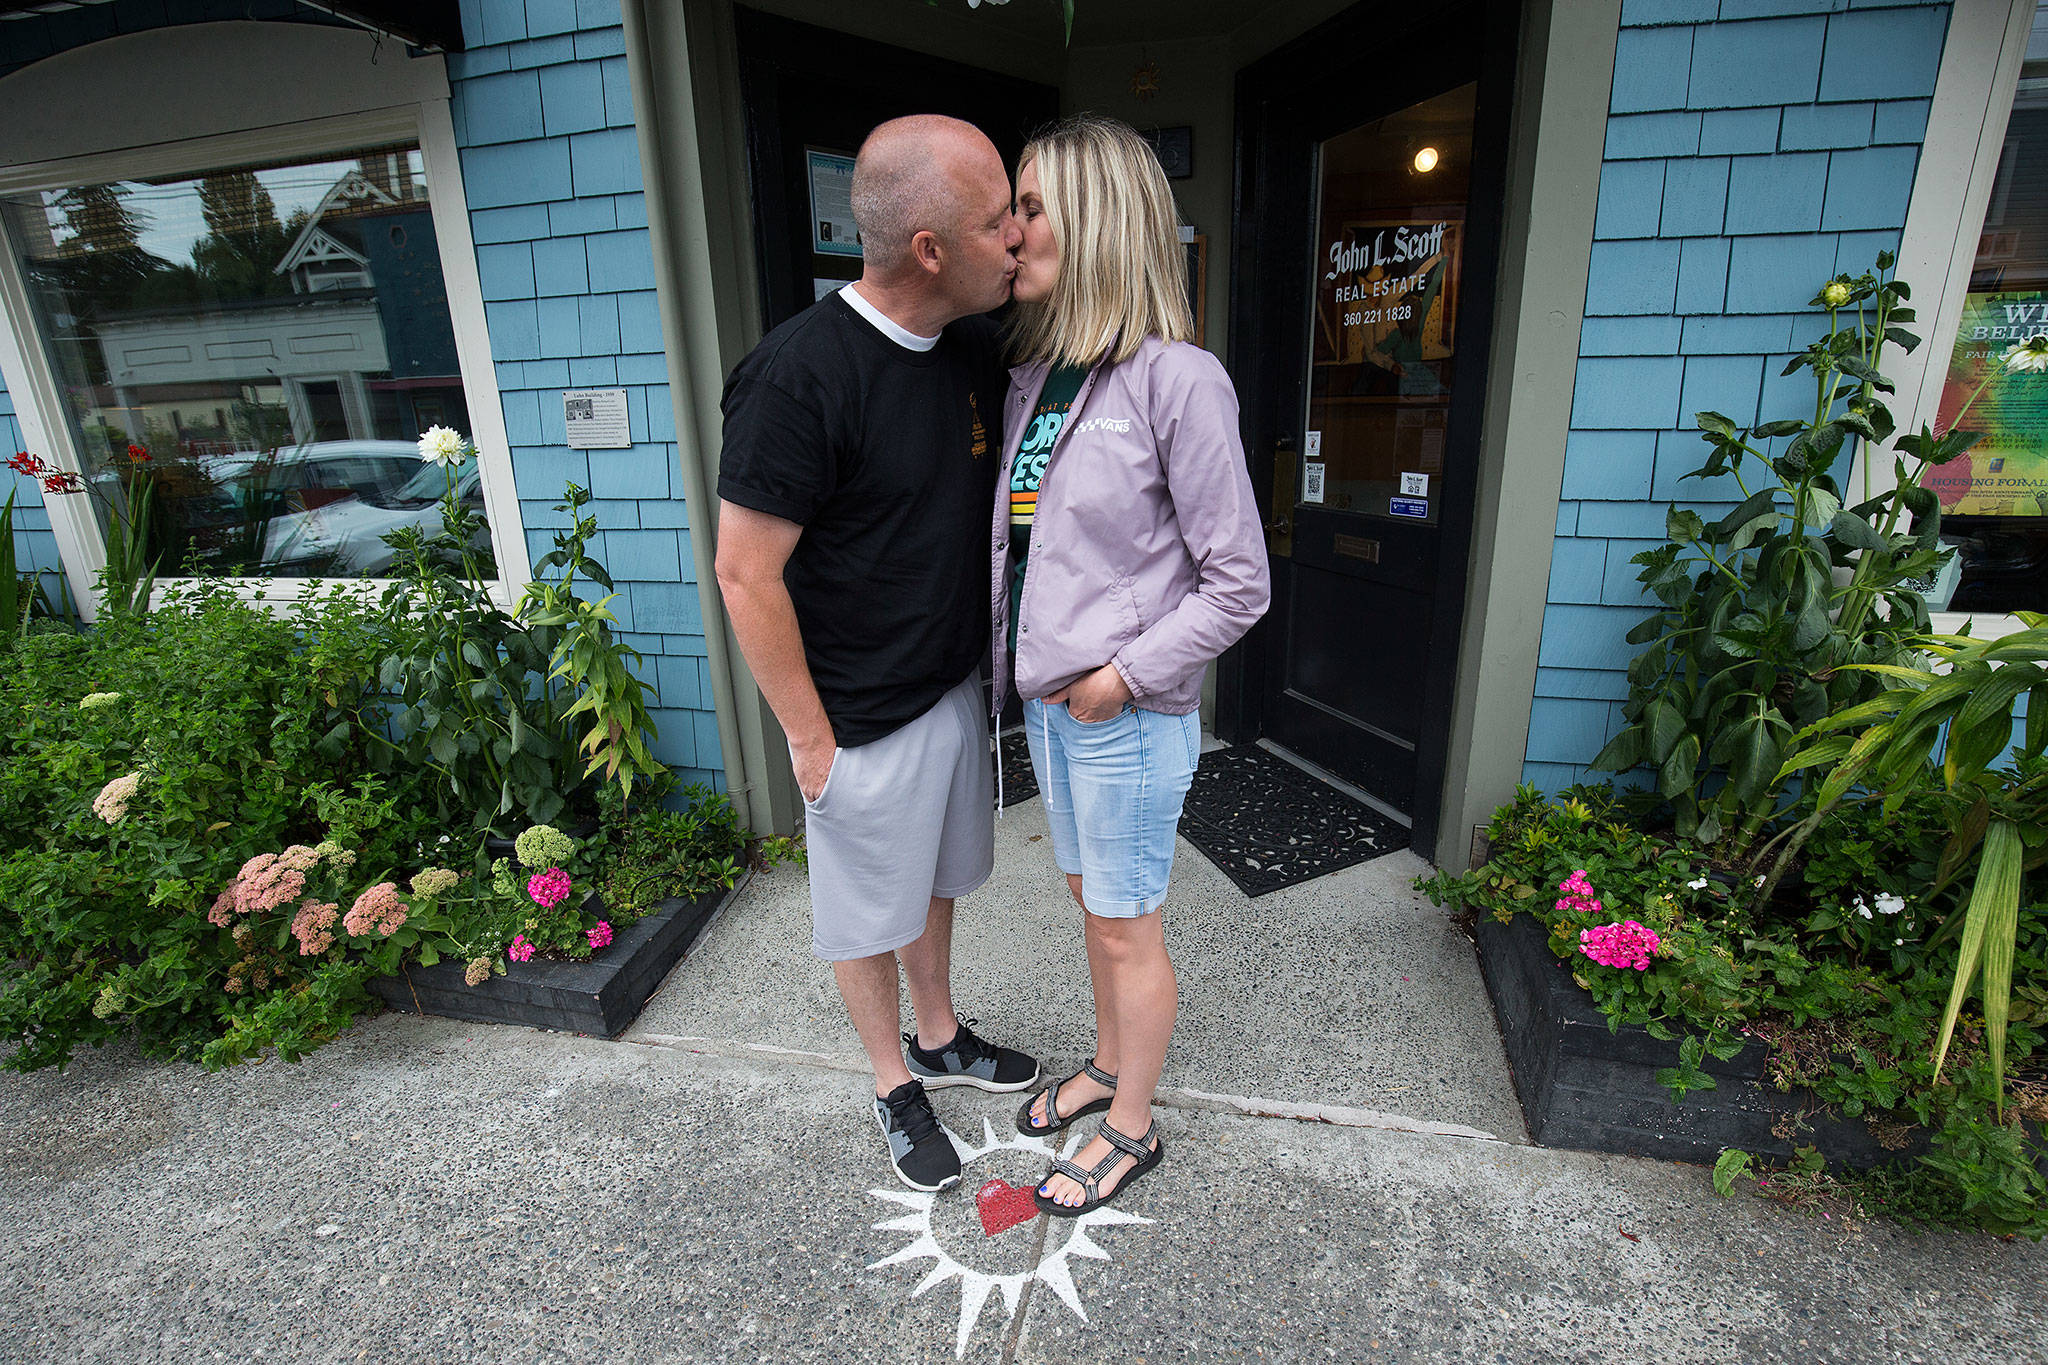 Theron Murphy, of Orem, Utah, kisses his wife, Jody, in front of the John L. Scott Real Estate office in Langley. People stand on the sidewalk on the heart, kiss, then make a hash mark on the chalkboard. The office keeps a tally and posts the monthly and yearly count. (Andy Bronson / The Herald)